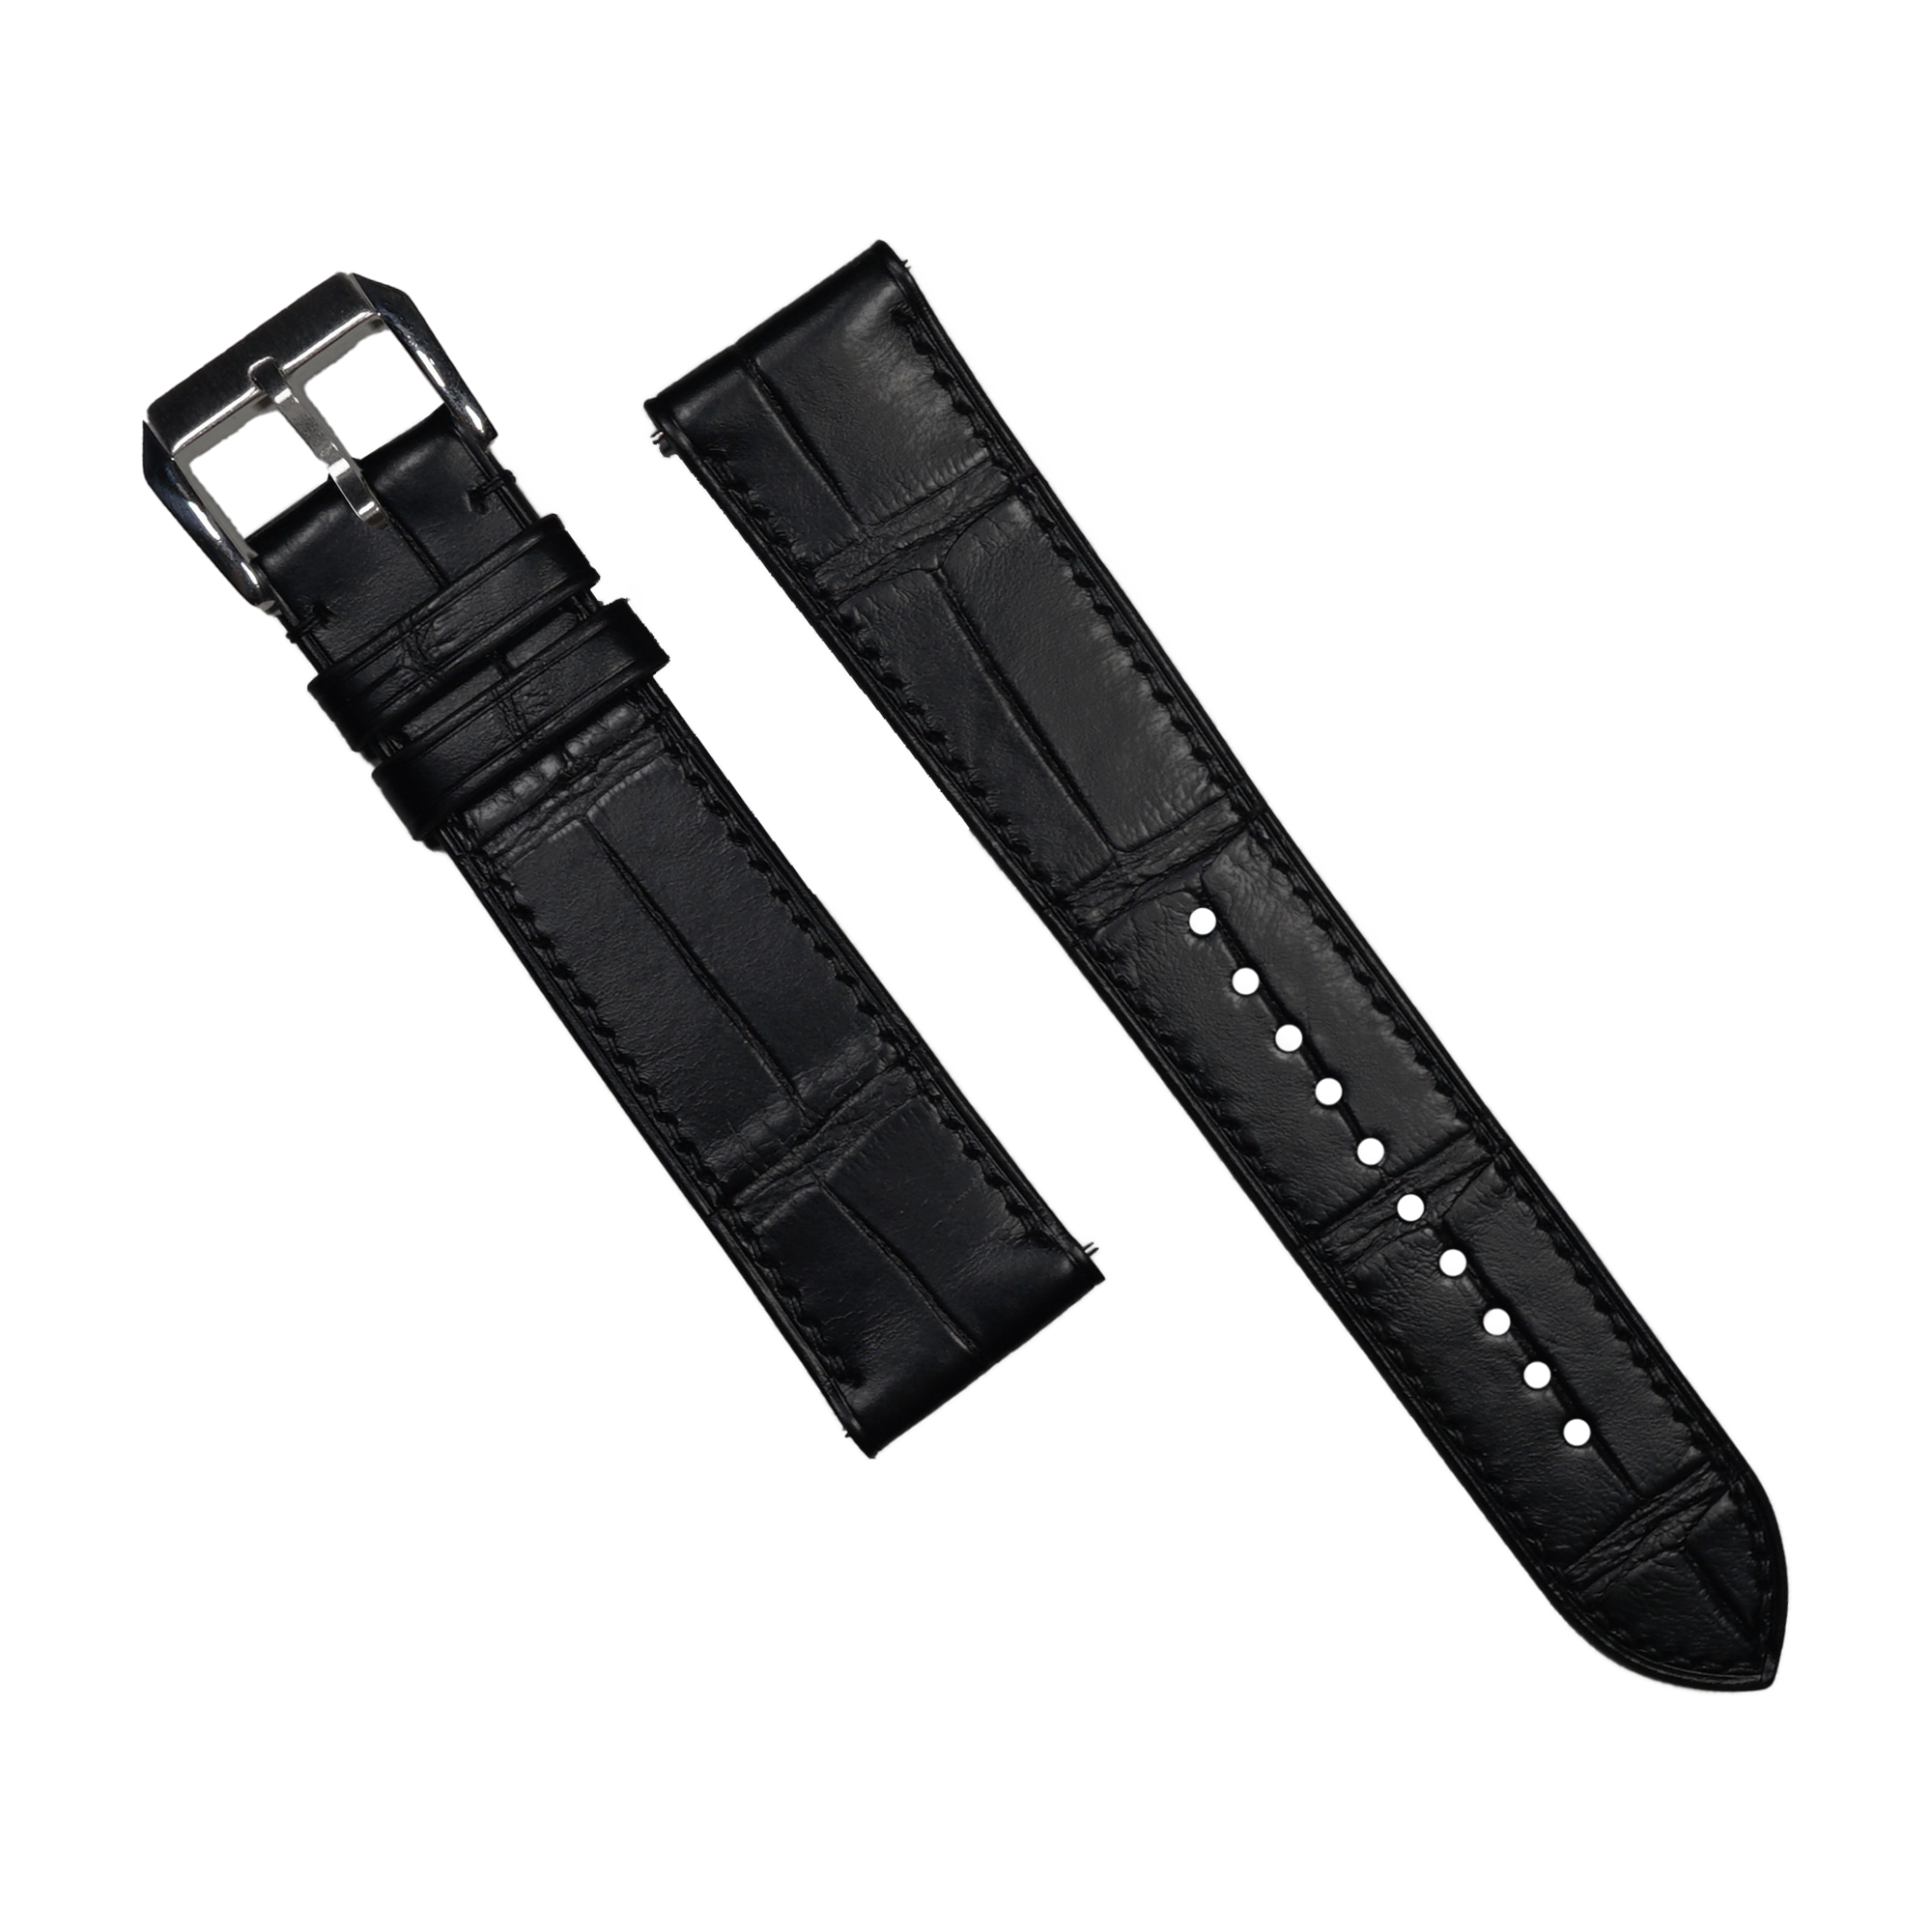 Watch Strap World 22 mm Black Alligator-Style Leather Watchband with  Stitching to Fit TAG Heuer Grand Carrera (Spring Bars Included) :  Amazon.in: Watches